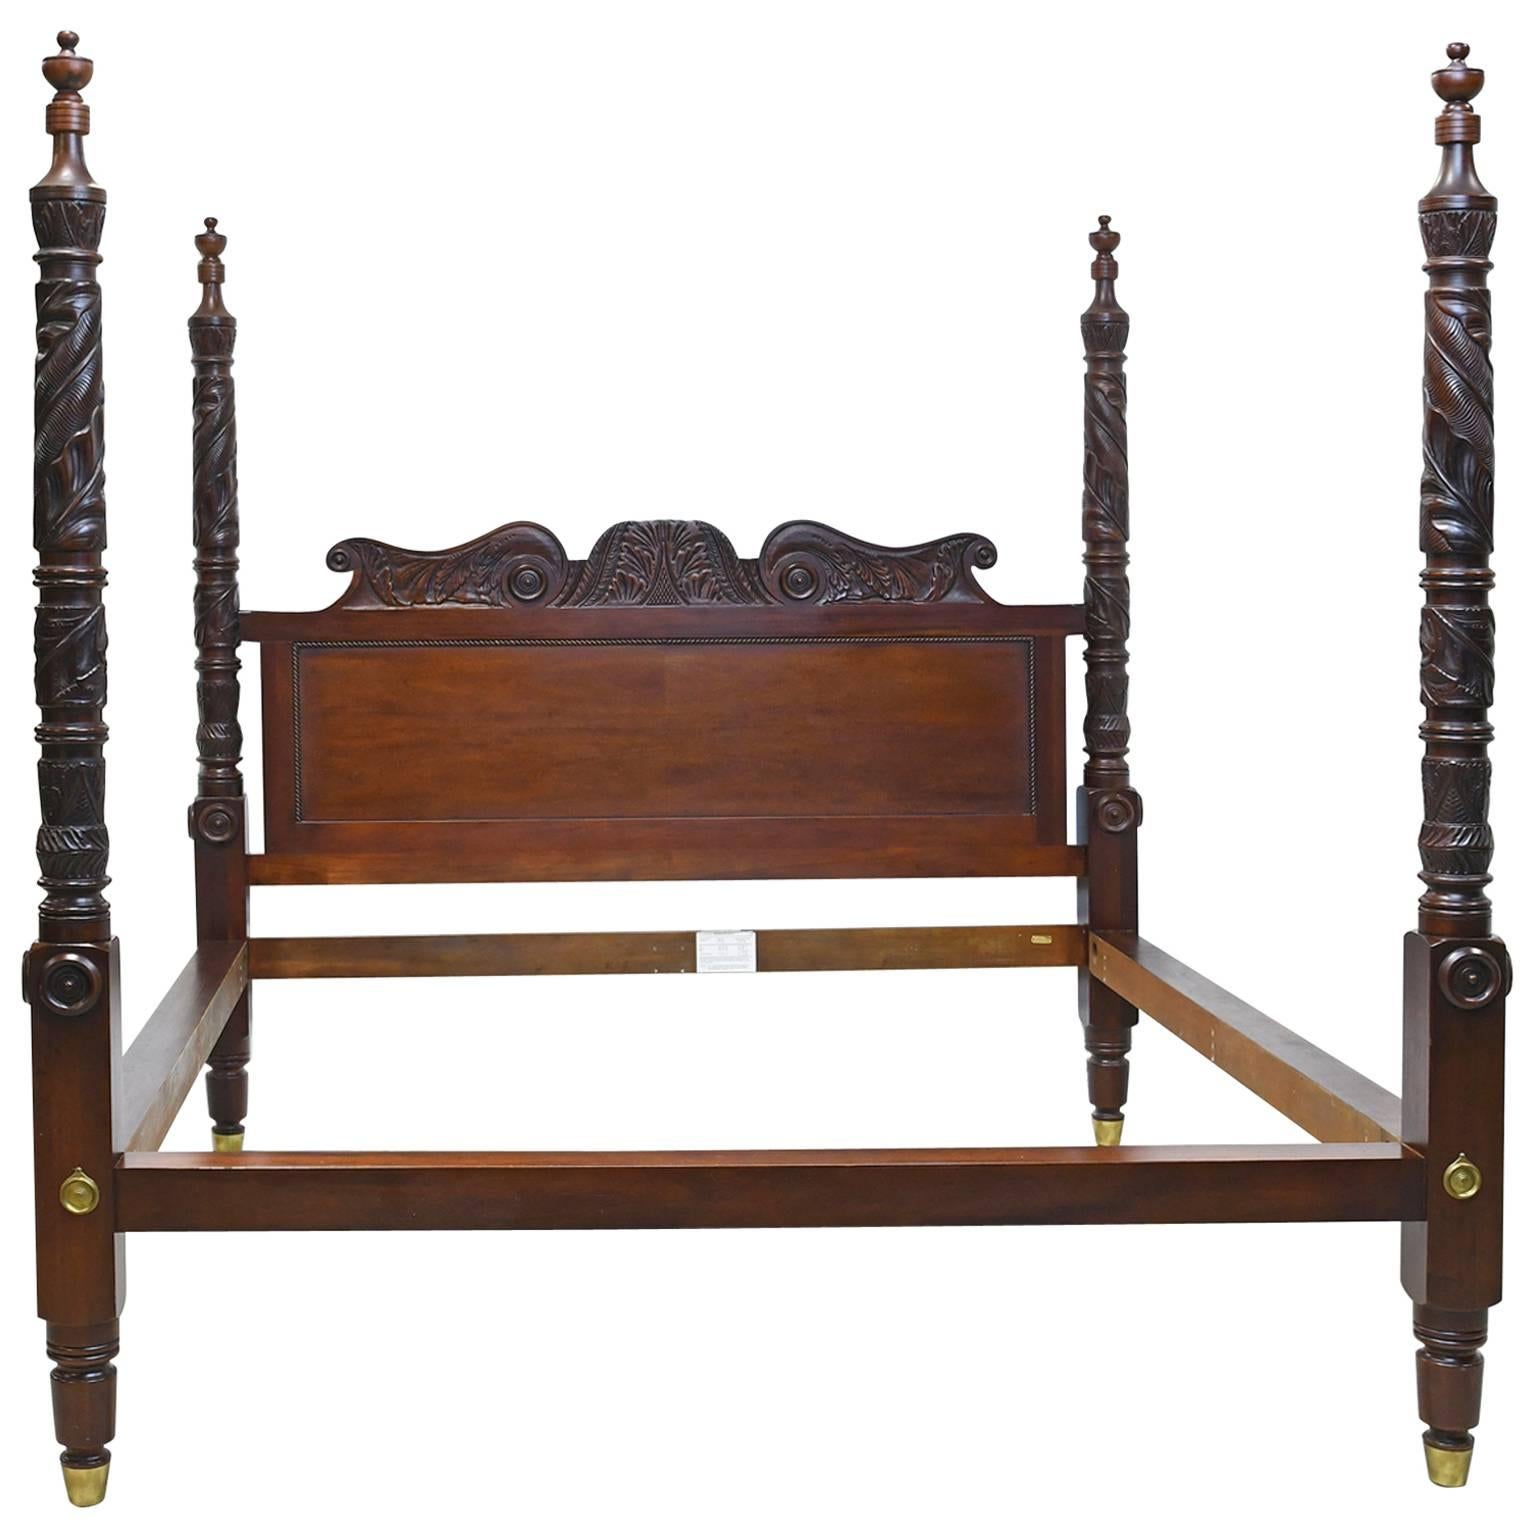 Ralph Lauren Carved Four-Poster King-Size Bed in Solid Mahogany at 1stDibs  | ralph lauren four poster bed, ralph lauren 4 poster bed, ralph lauren  safari bed